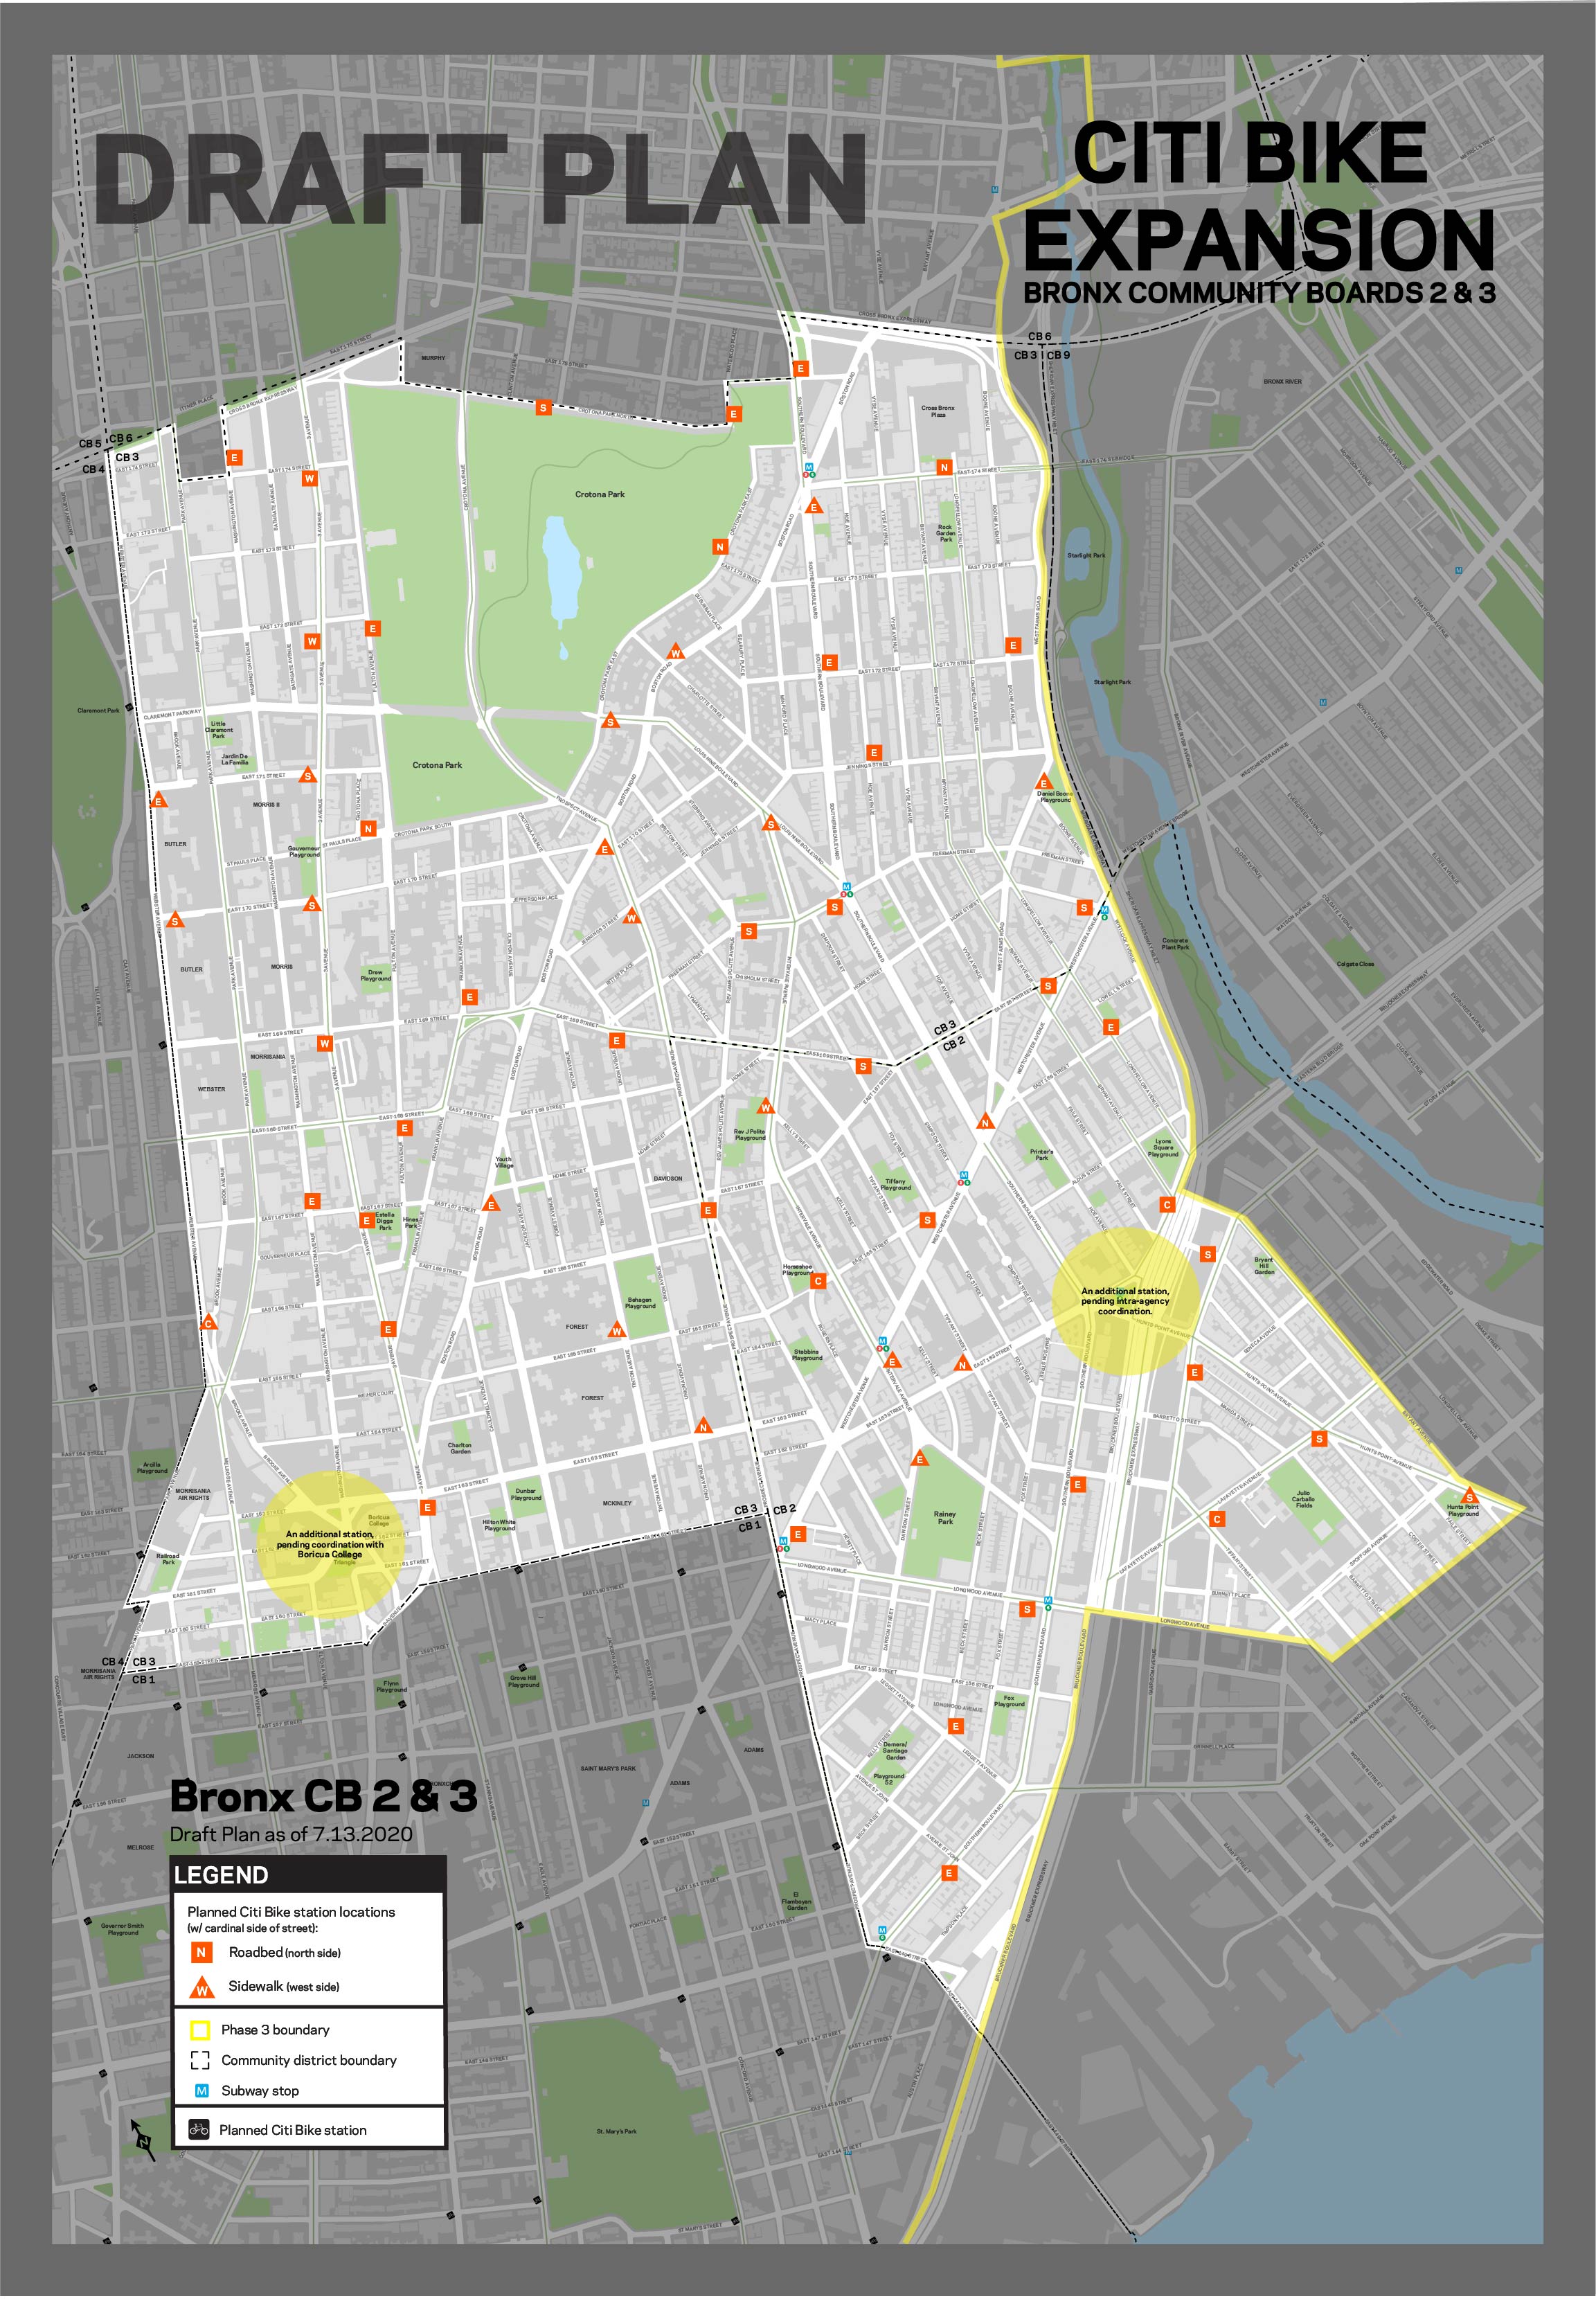 The draft plan for Bronx's Community Boards 2 & 3.